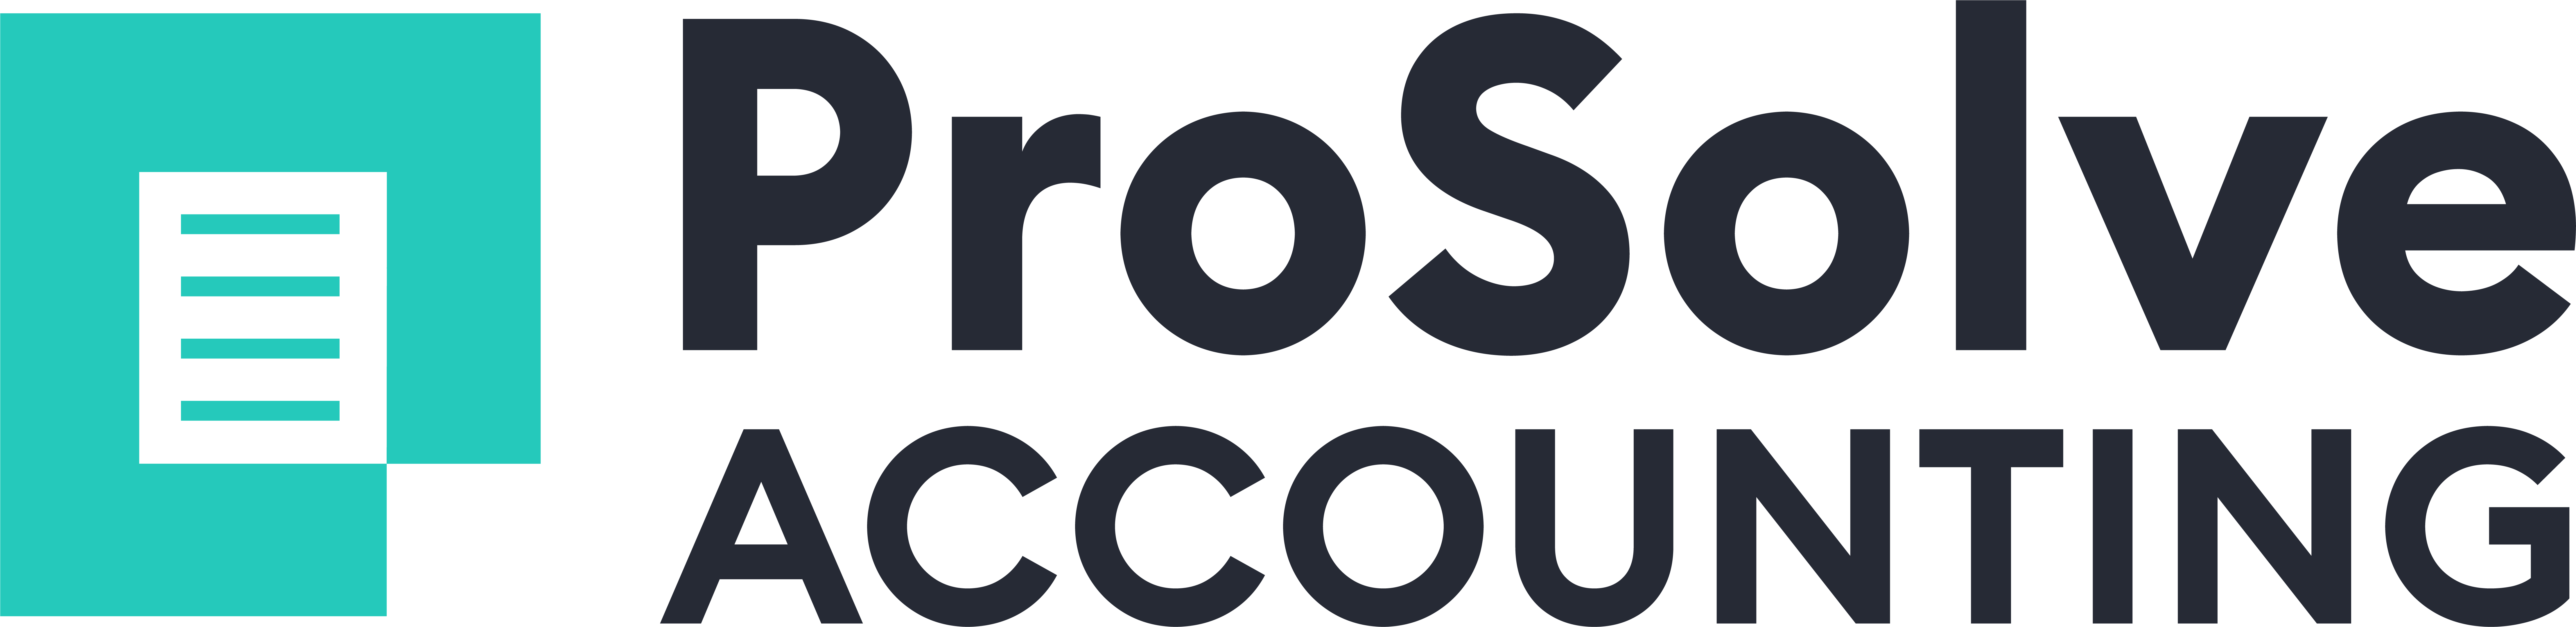 e-commerce accounting - ProSolve Accounting